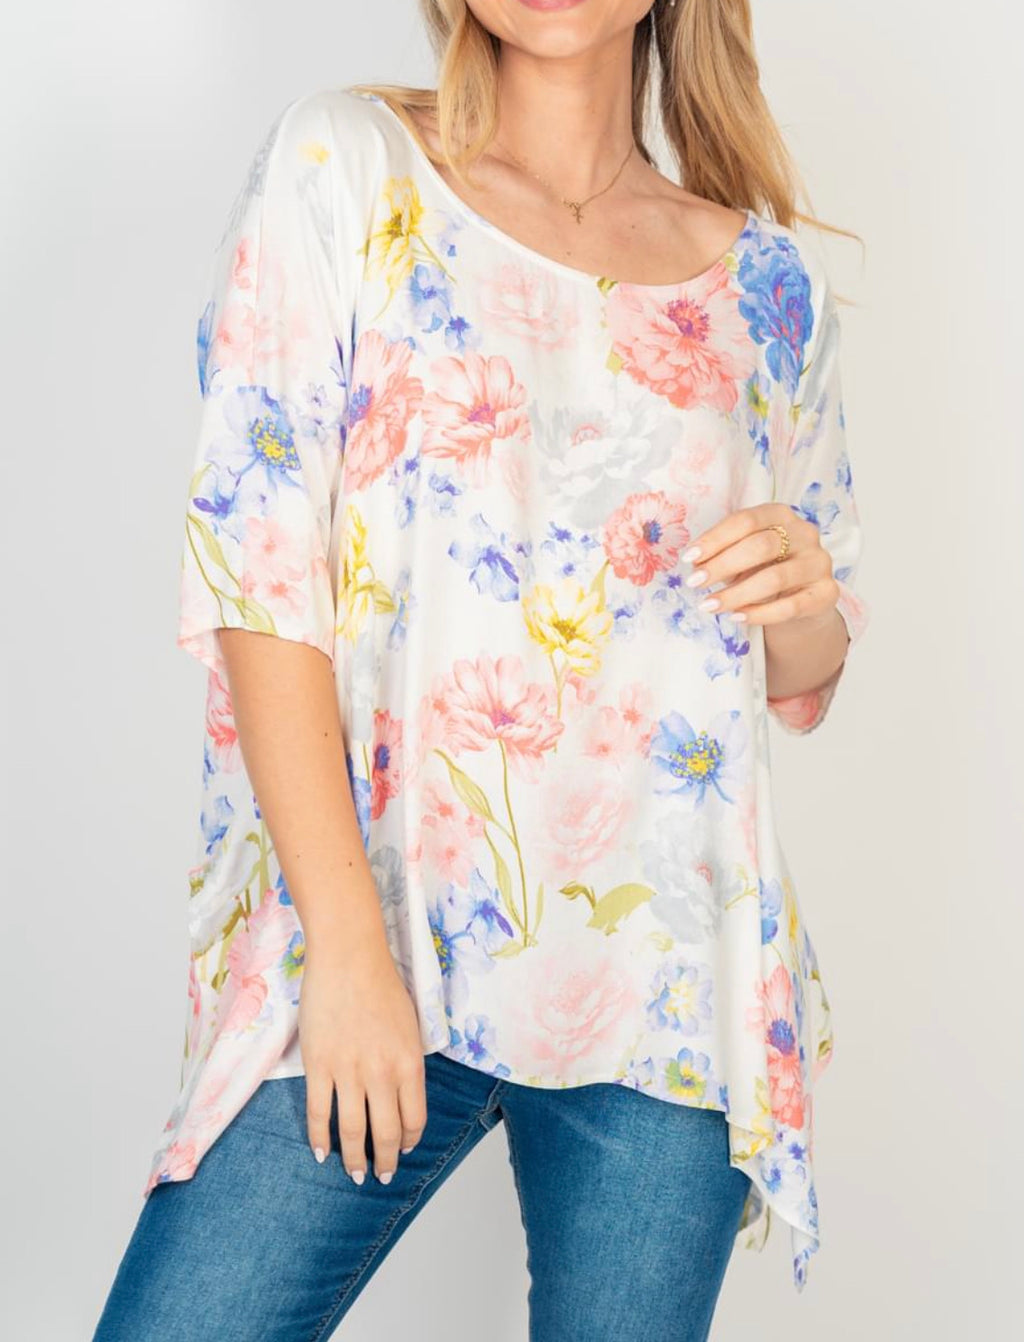 Fresh Spring Day Floral Print Ivory Handkerchief Top